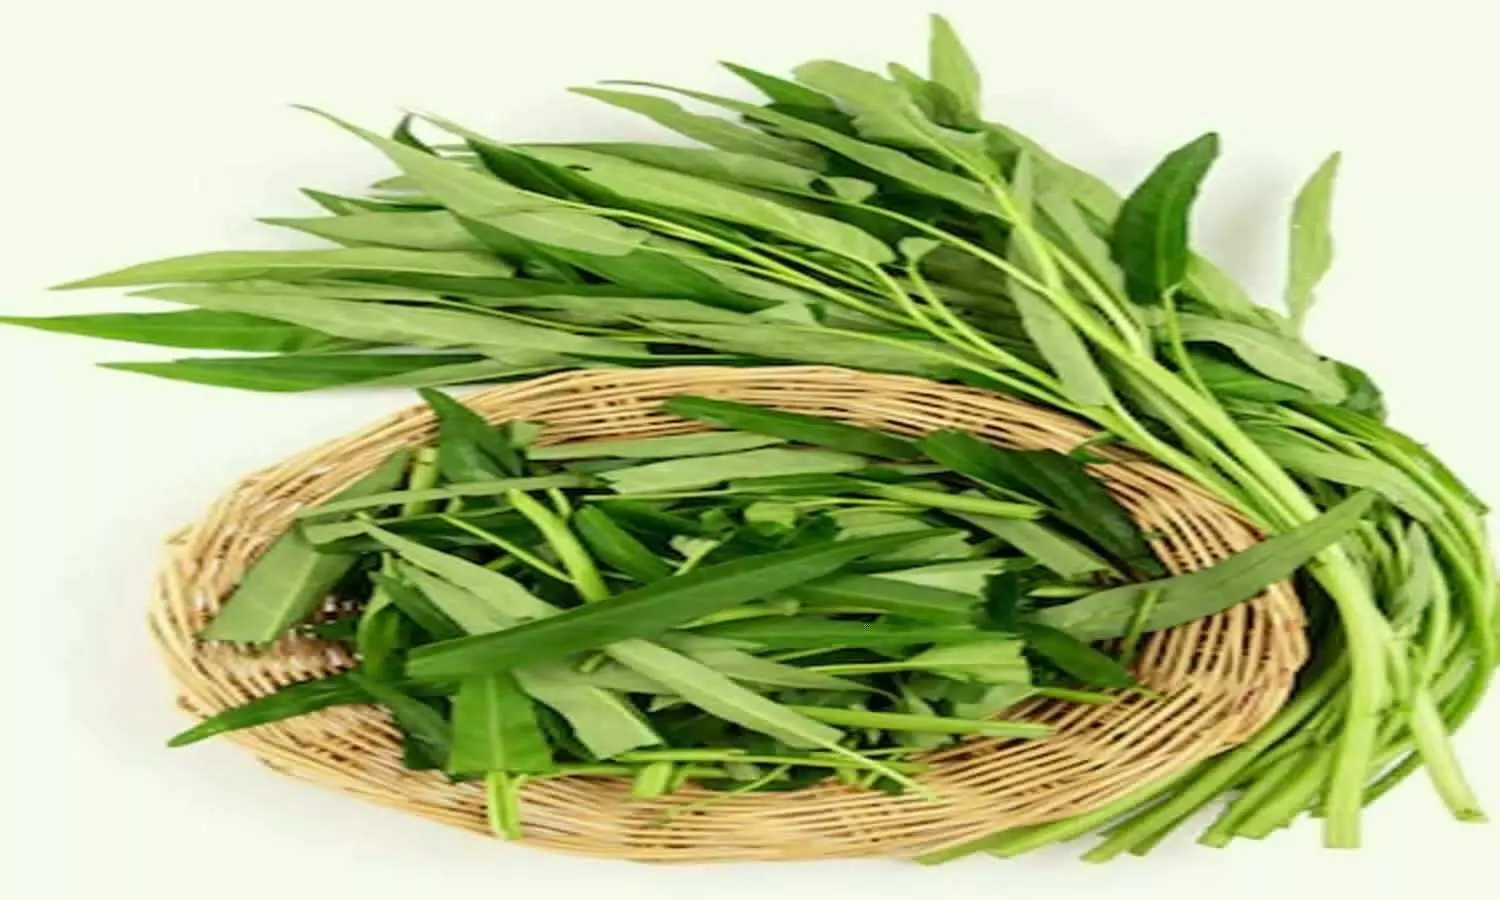 Benefits of water spinach